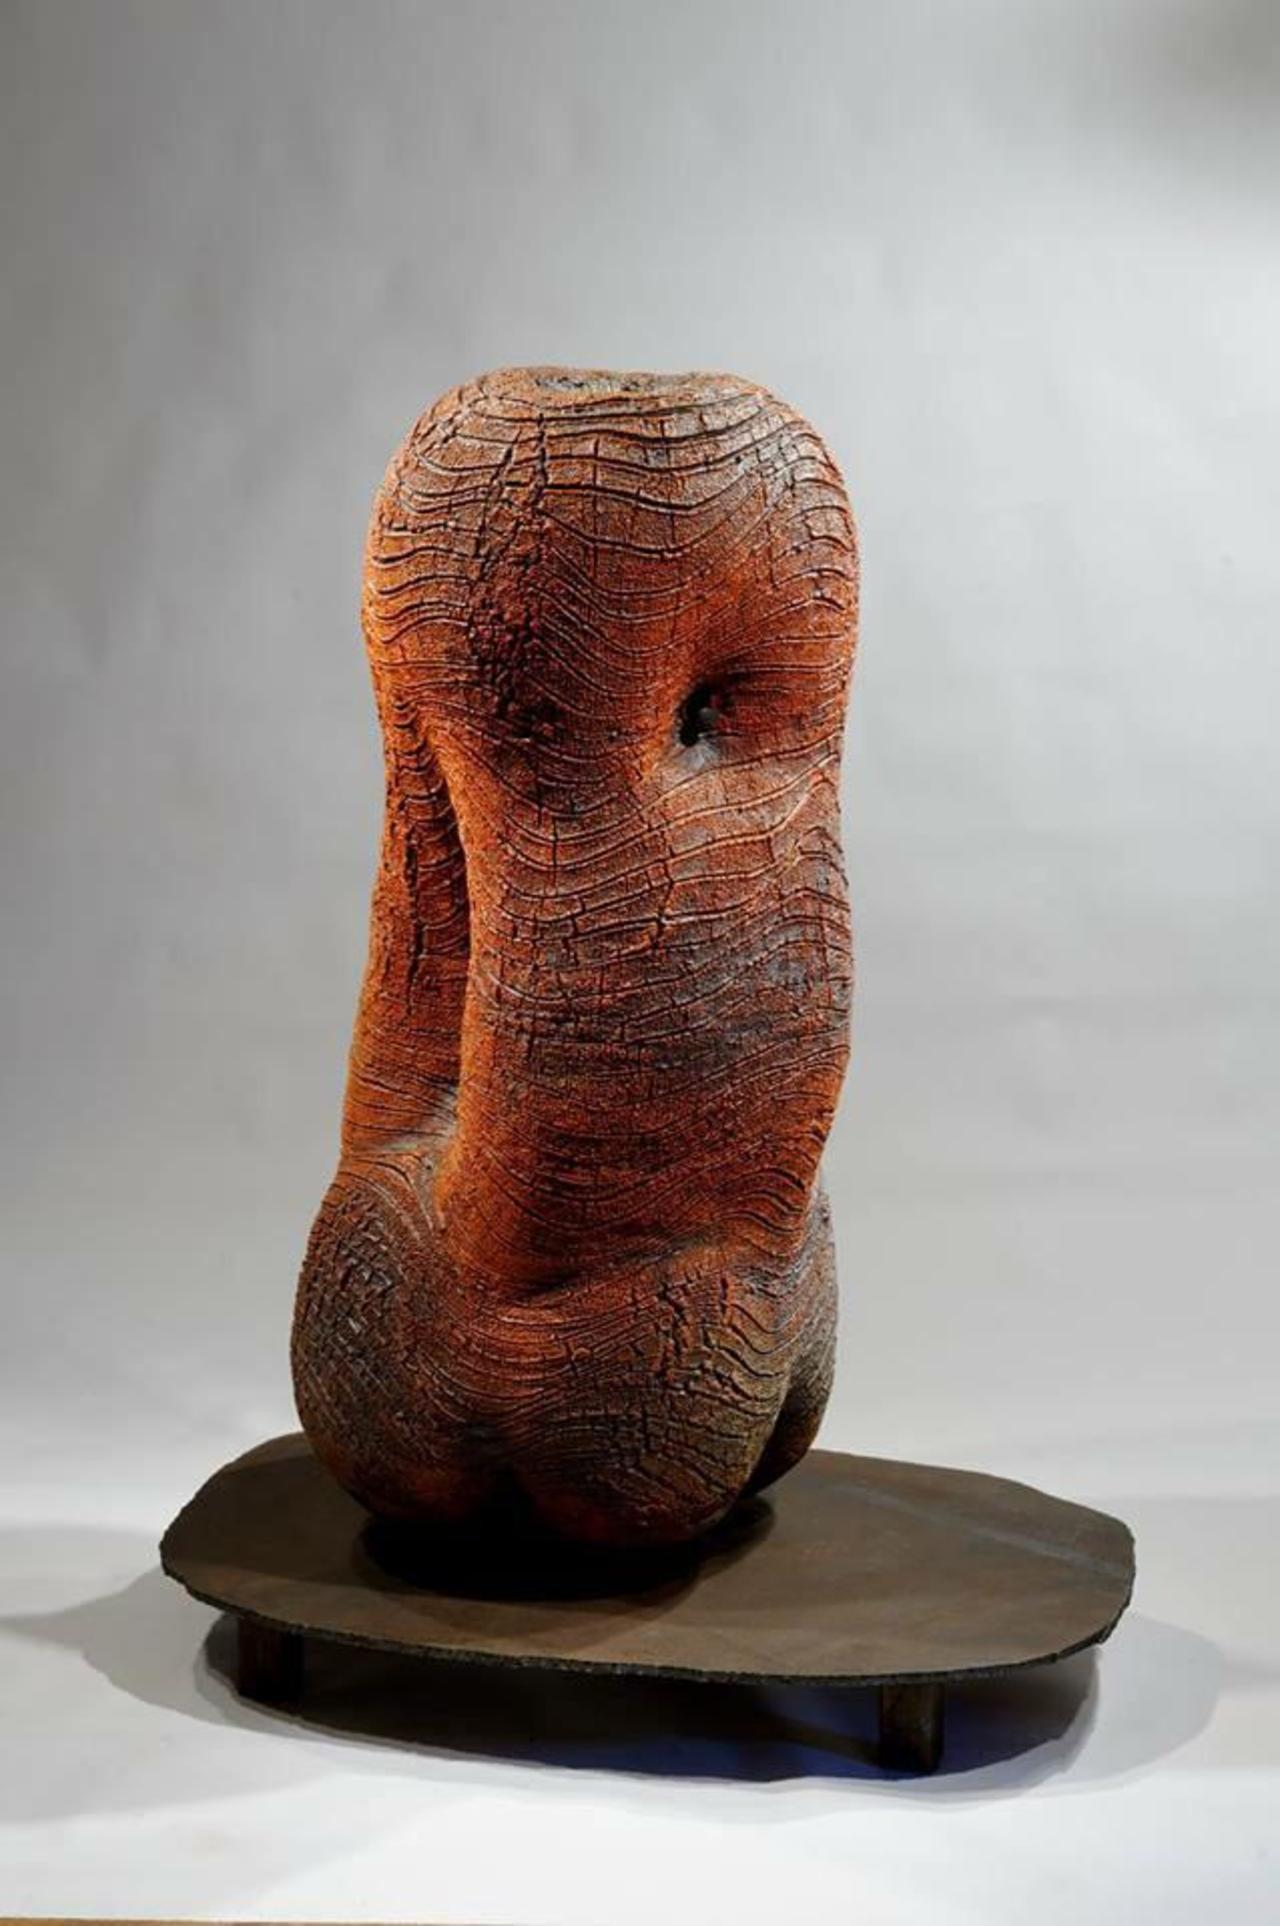 Here is Thiébaut Chagué's Red Sculpture for #MakerOfTheDay today! #COLLECT15 Stand 2.1 @CraftsCouncilUK #ceramics http://t.co/bpY0co1QGM